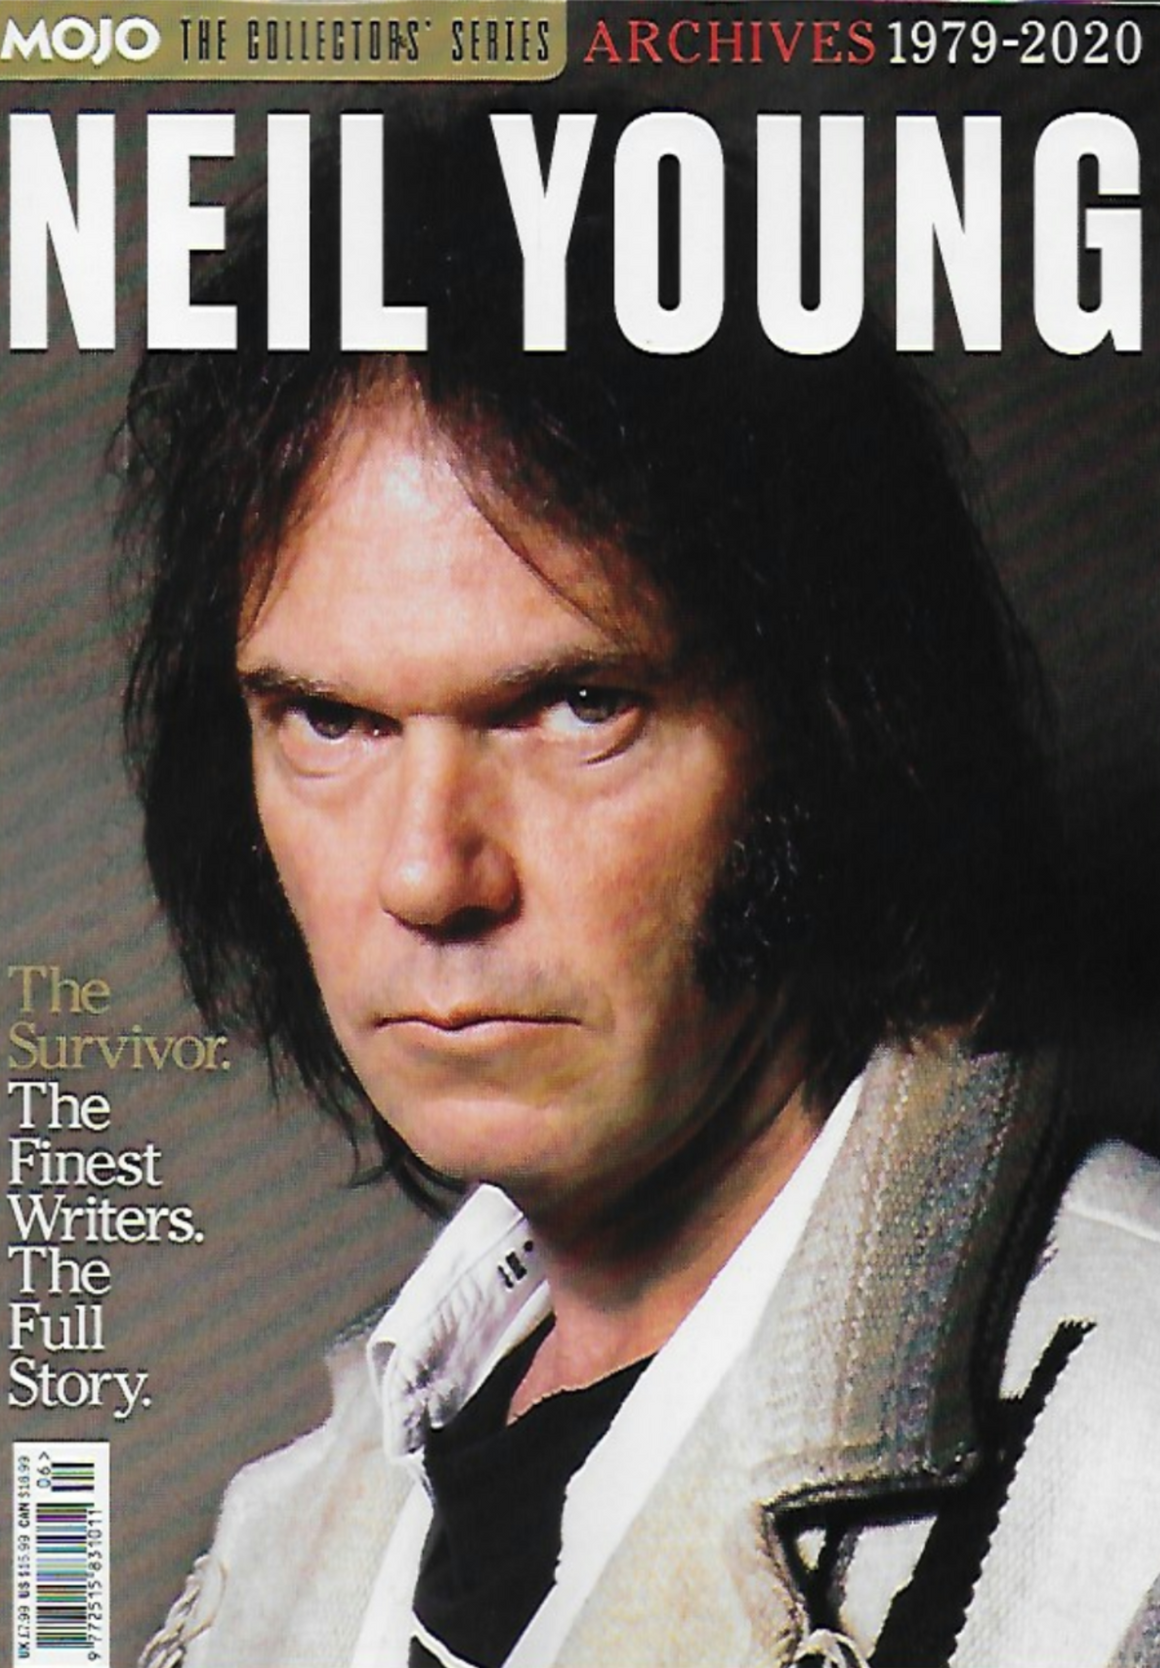 UK MOJO COLLECTORS' SERIES magazine Sept 2020 - Neil Young 1979-2020